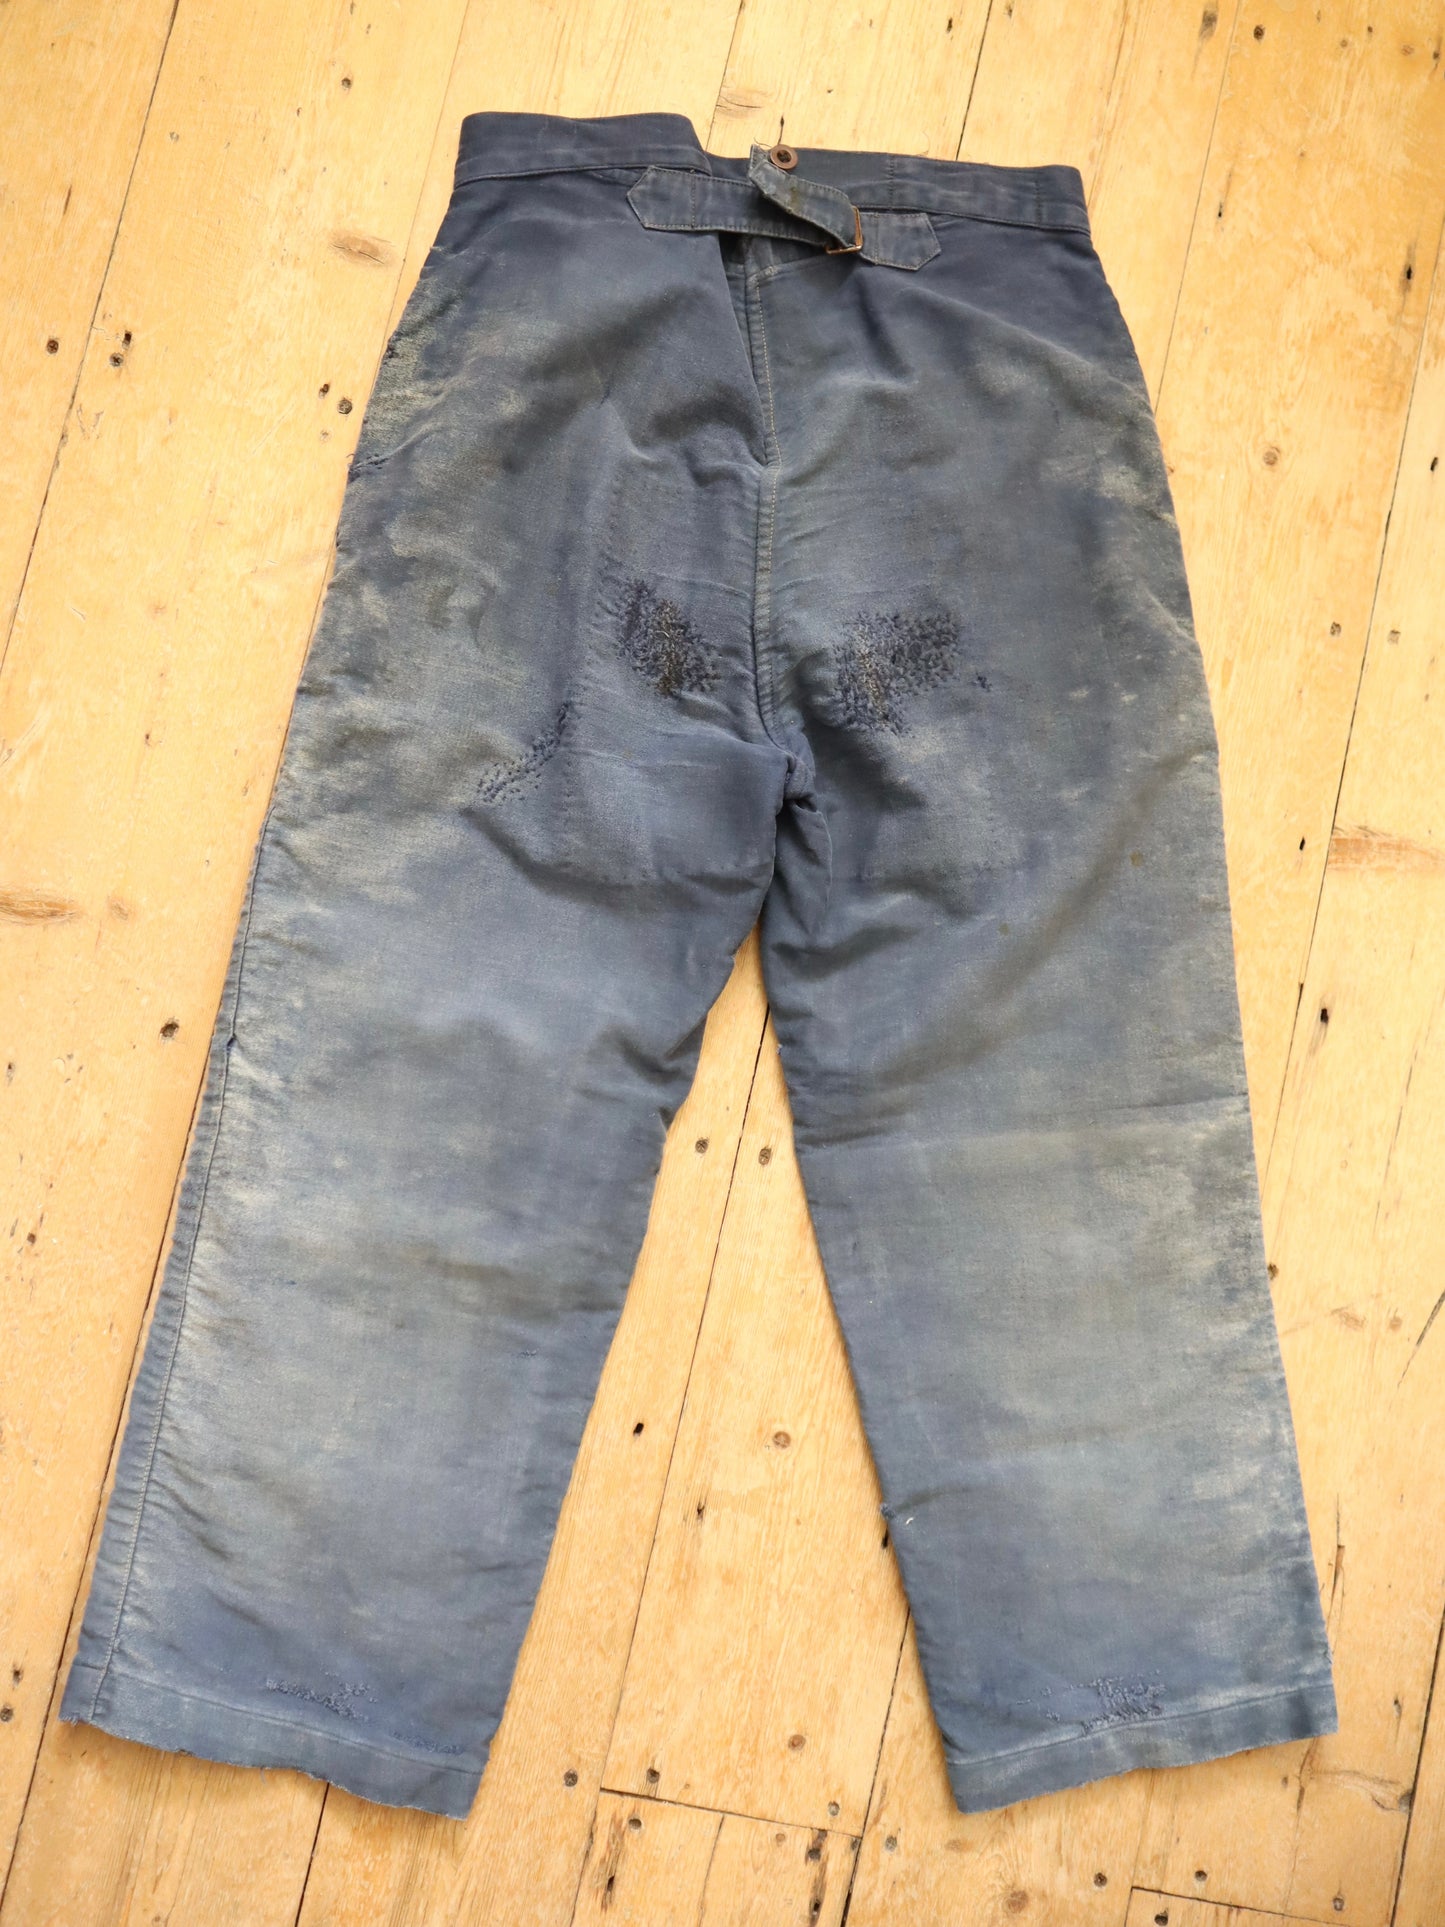 French Le Mont St Michel Blue Moleskin Workwear Trousers Pants Repairs Darned 1950s